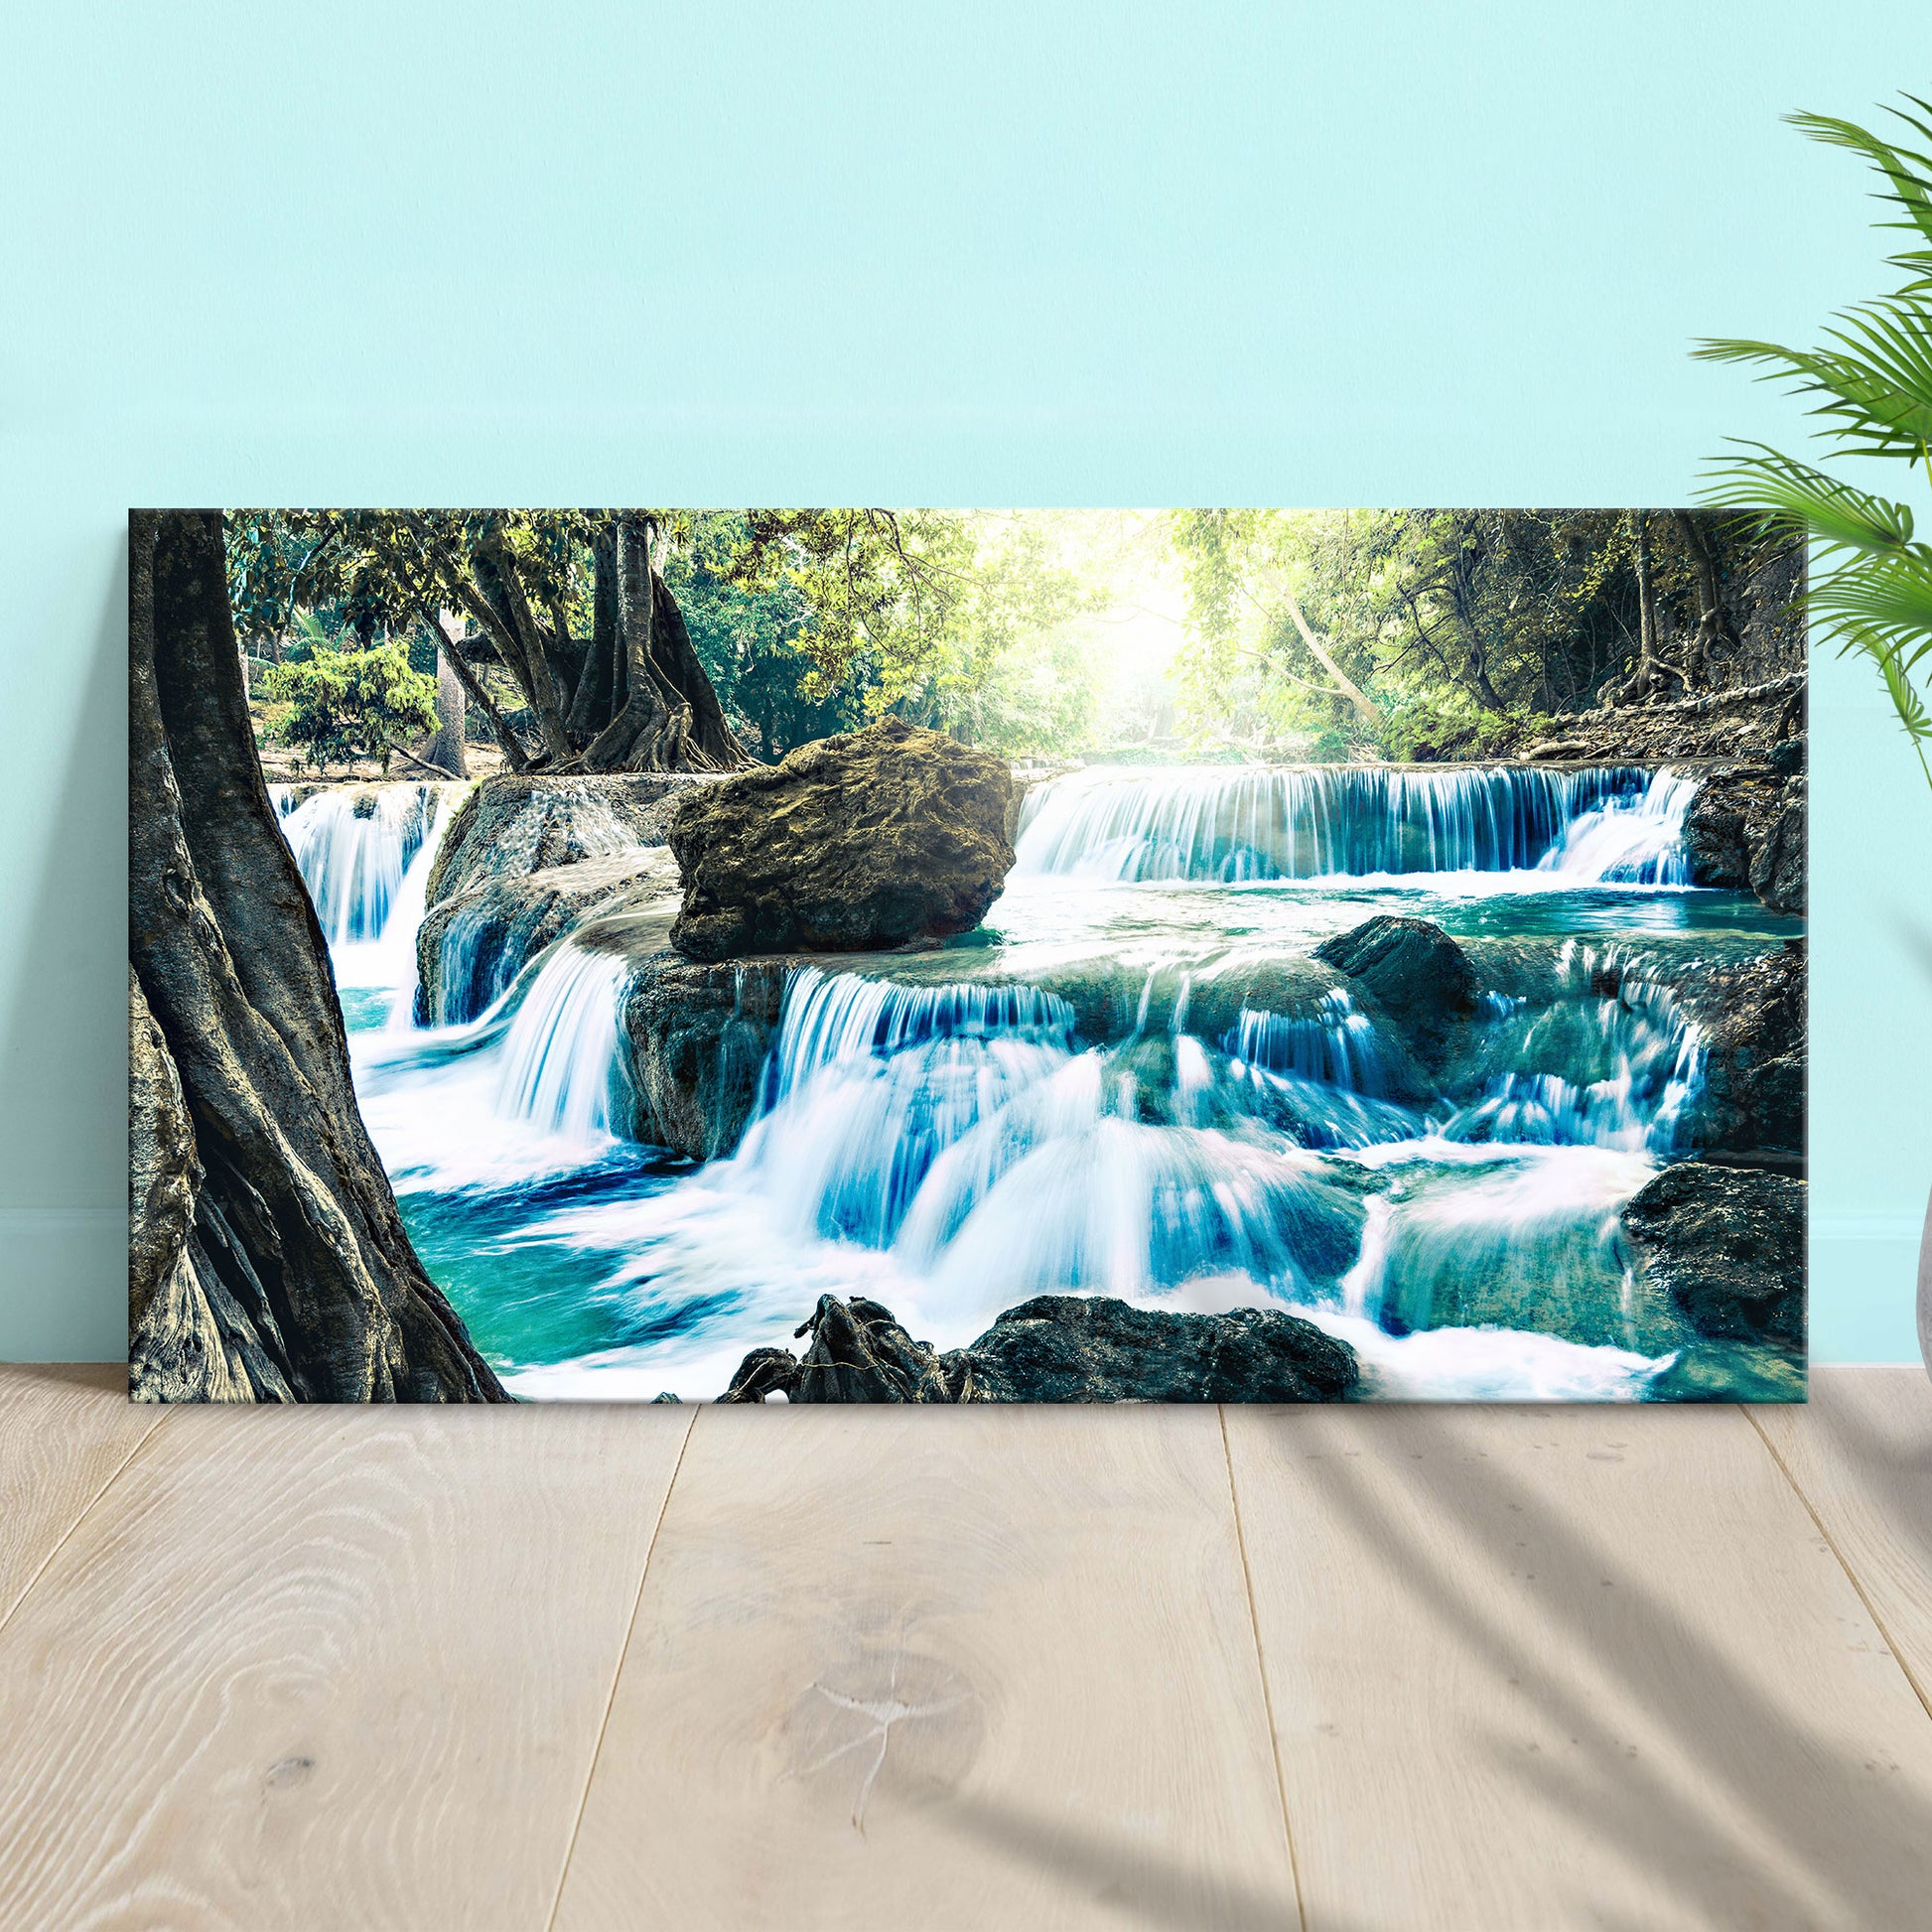 Flowy Forest River Waterfall Canvas Wall Art - Image by Tailored Canvases